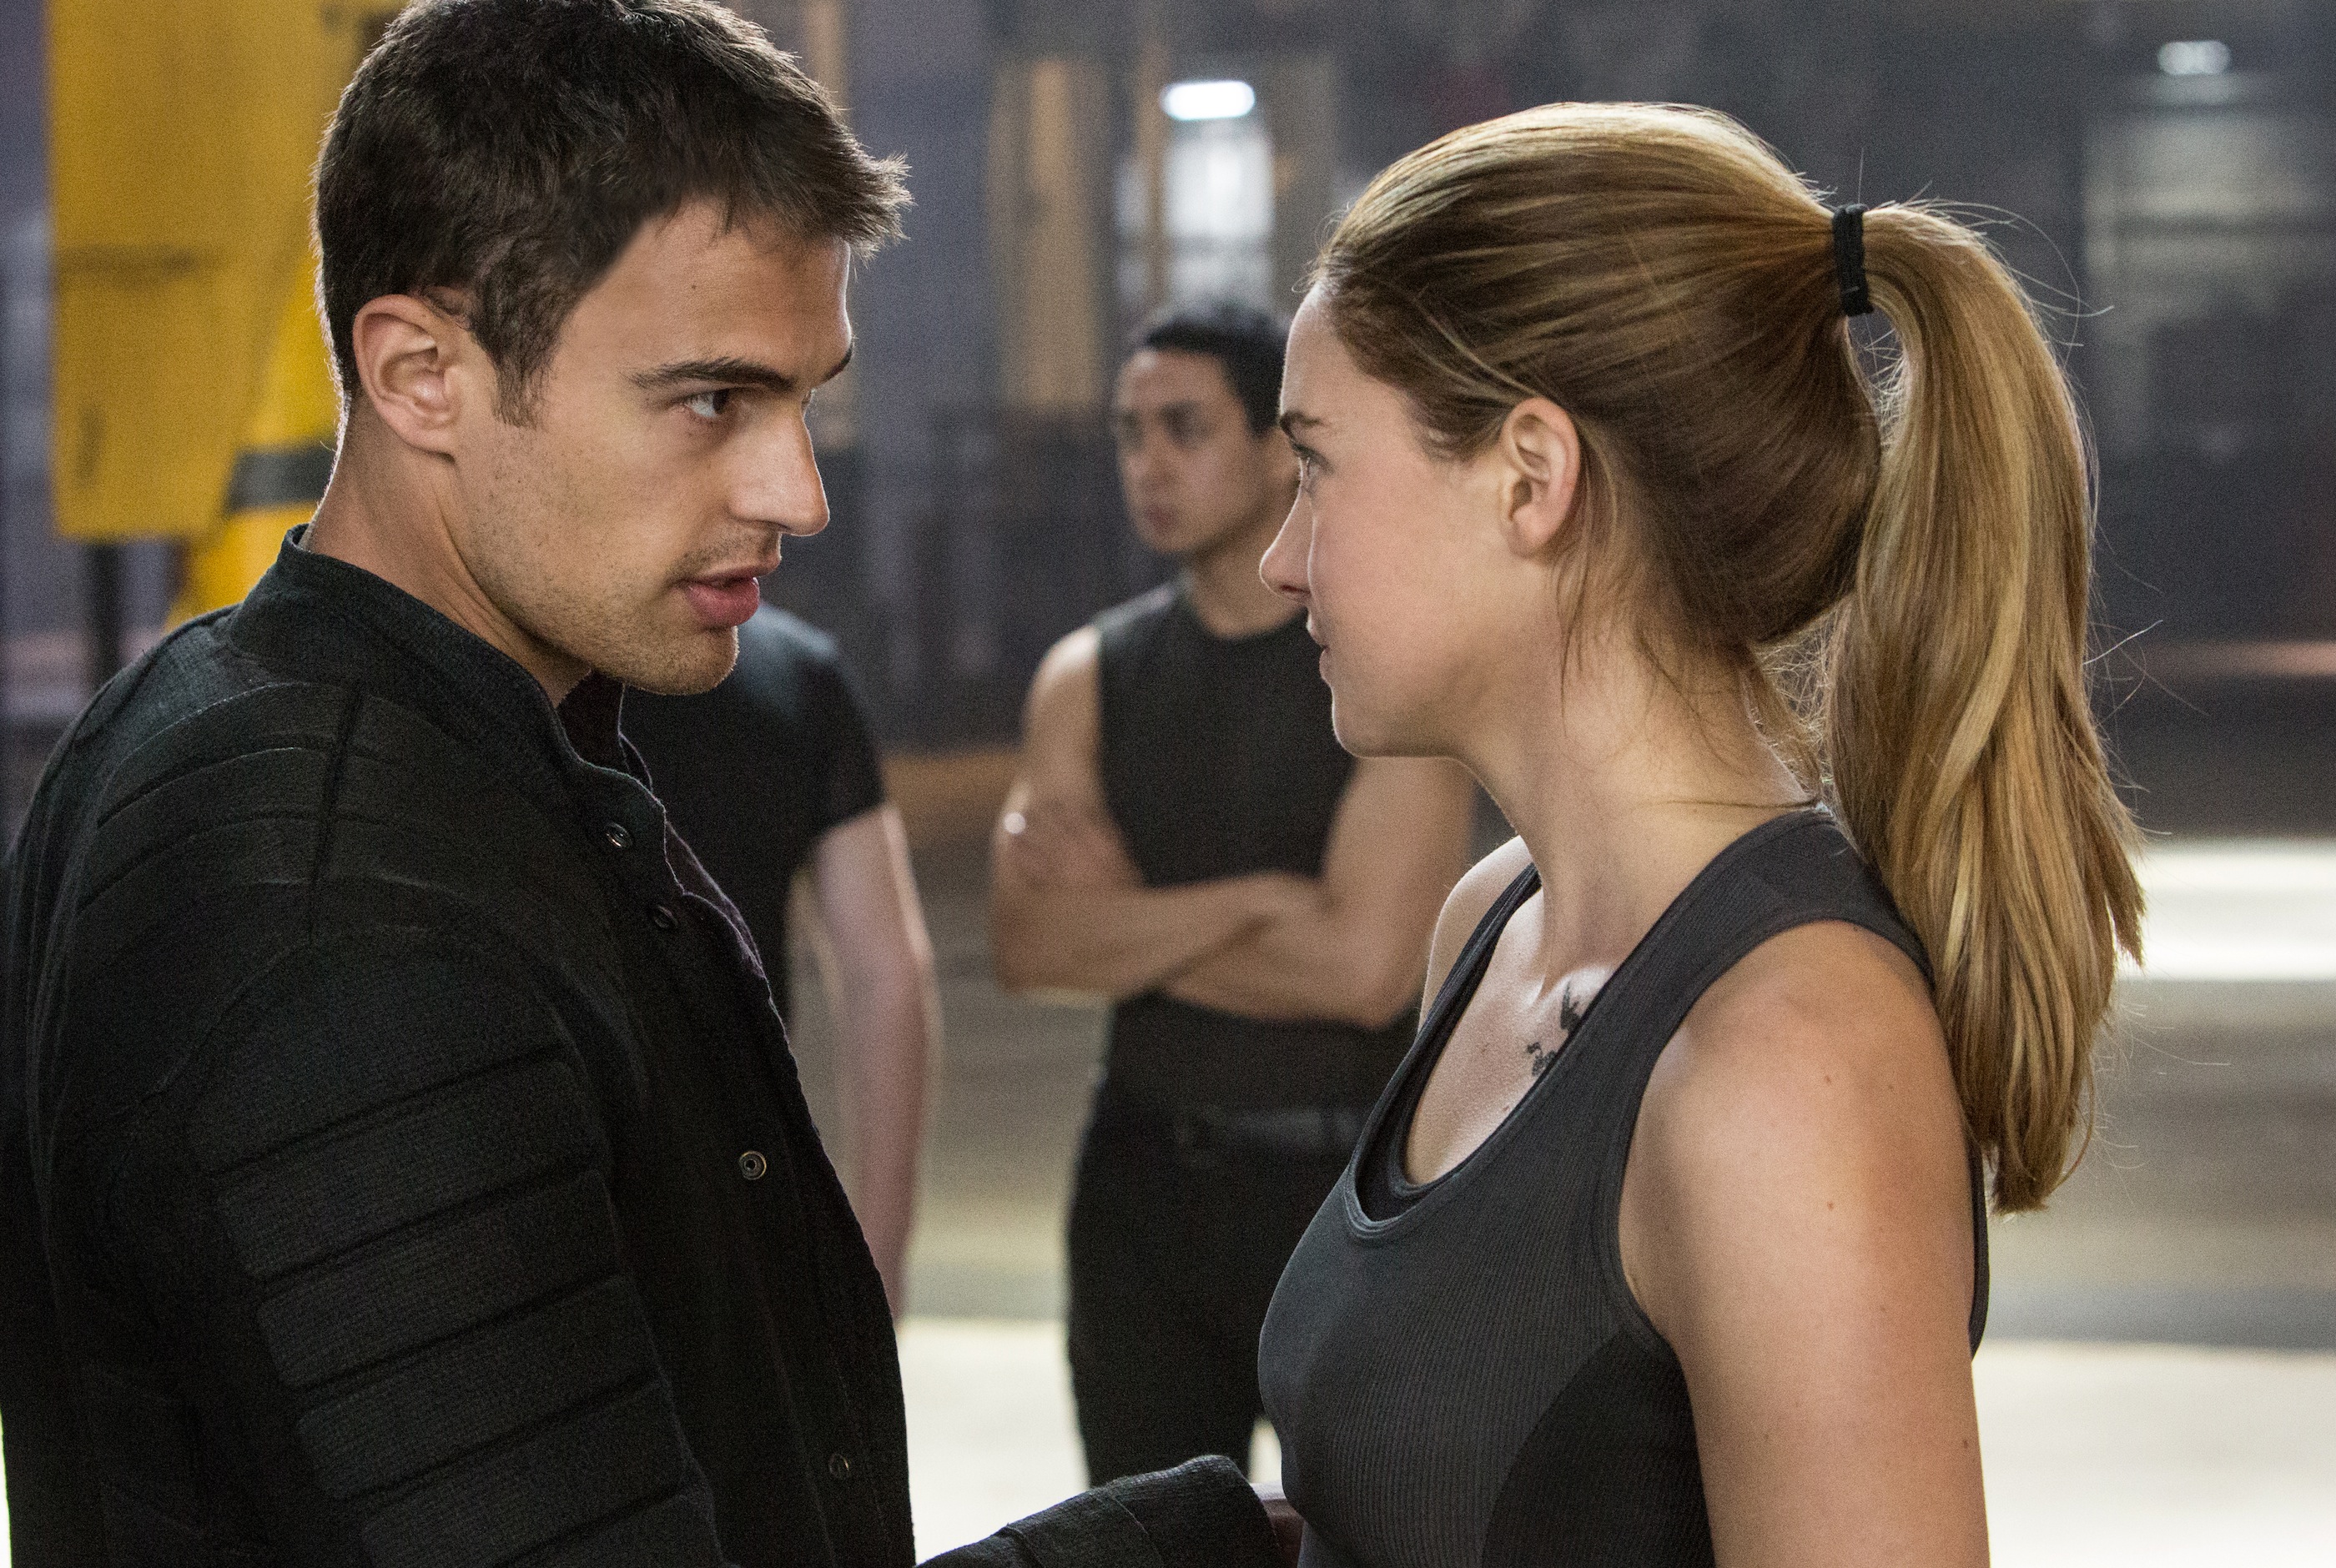 Divergent DVD/BluRay Sales Continue to Slay the Competition